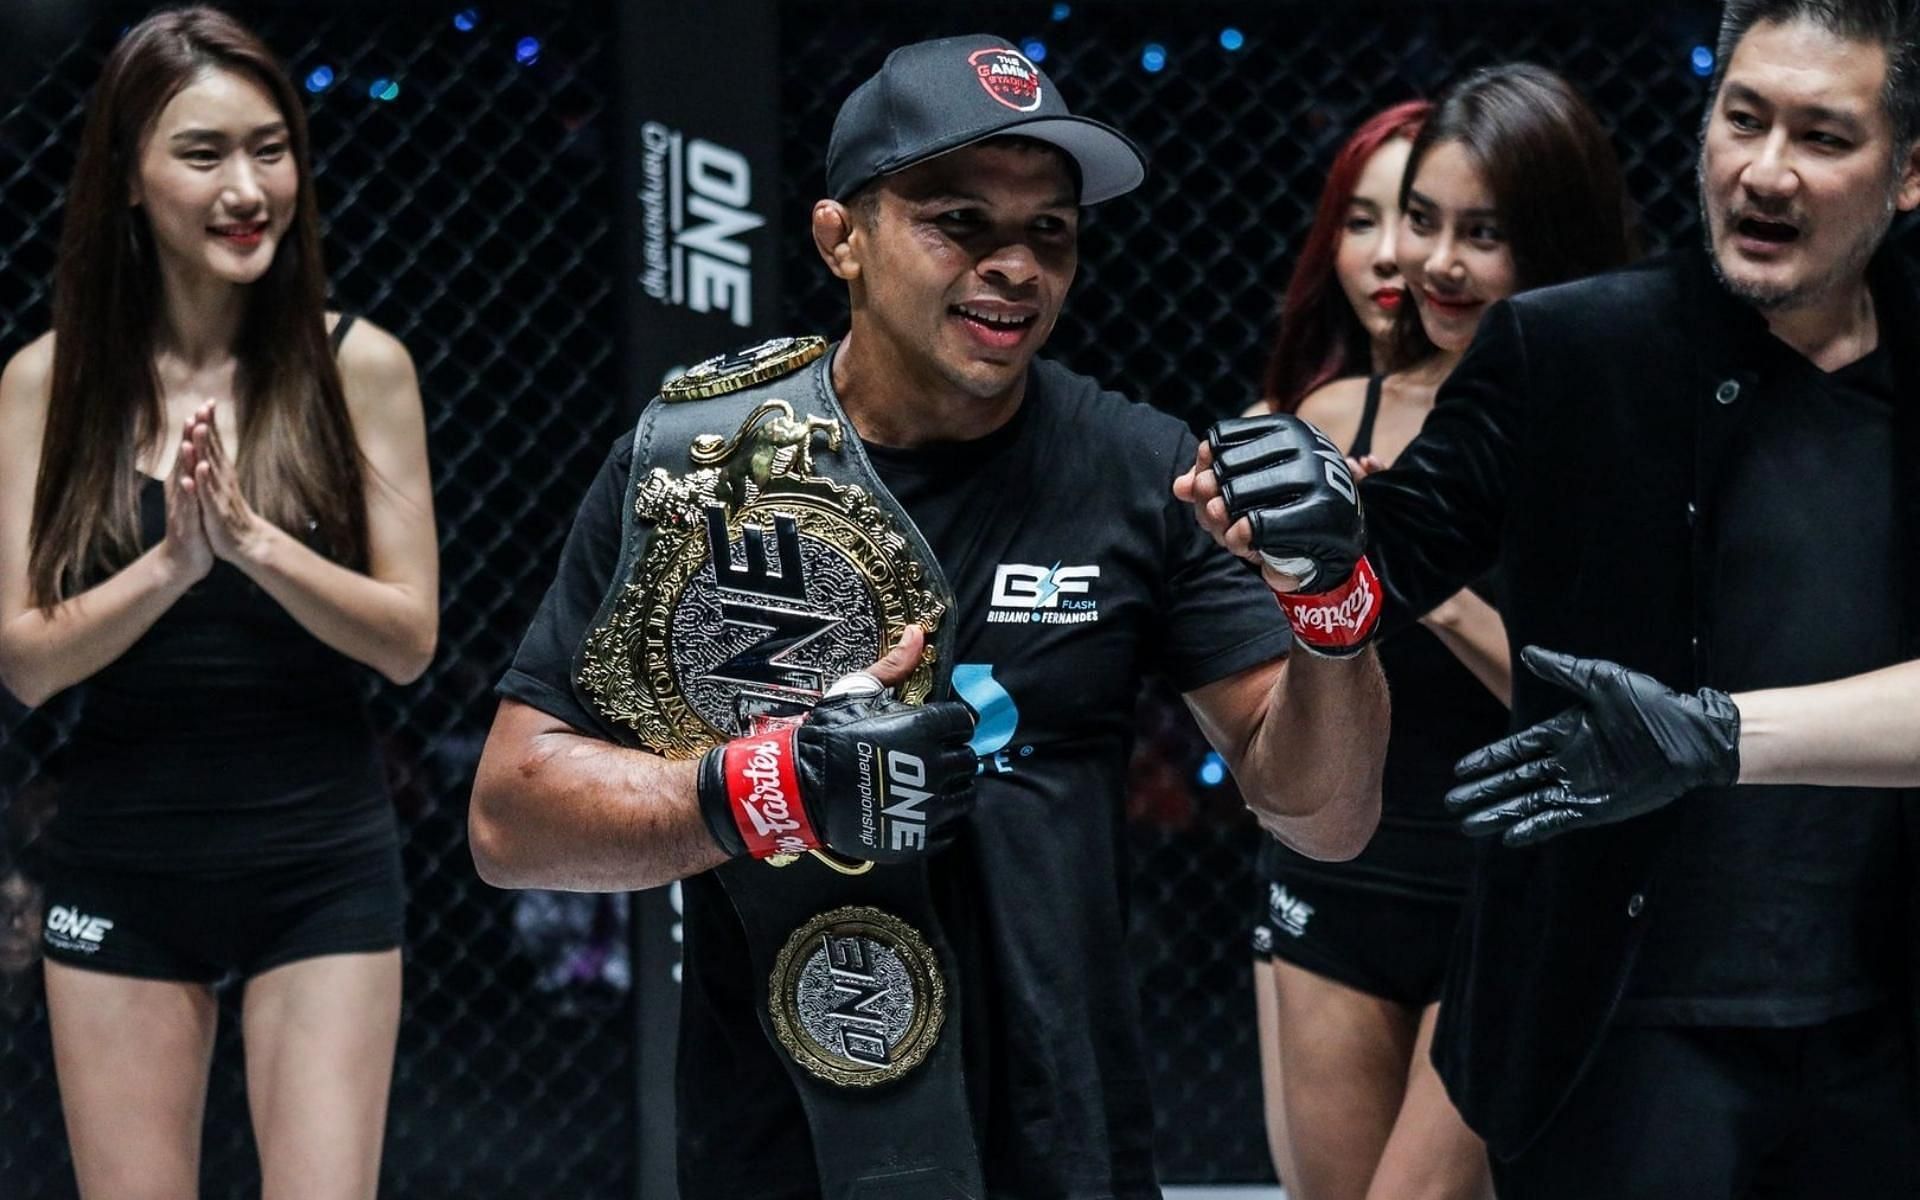 ONE Championship bantamweight king Bibiano Fernandes is one of the most dominant champions in ONE Championship history. (Image courtesy of ONE Championship)